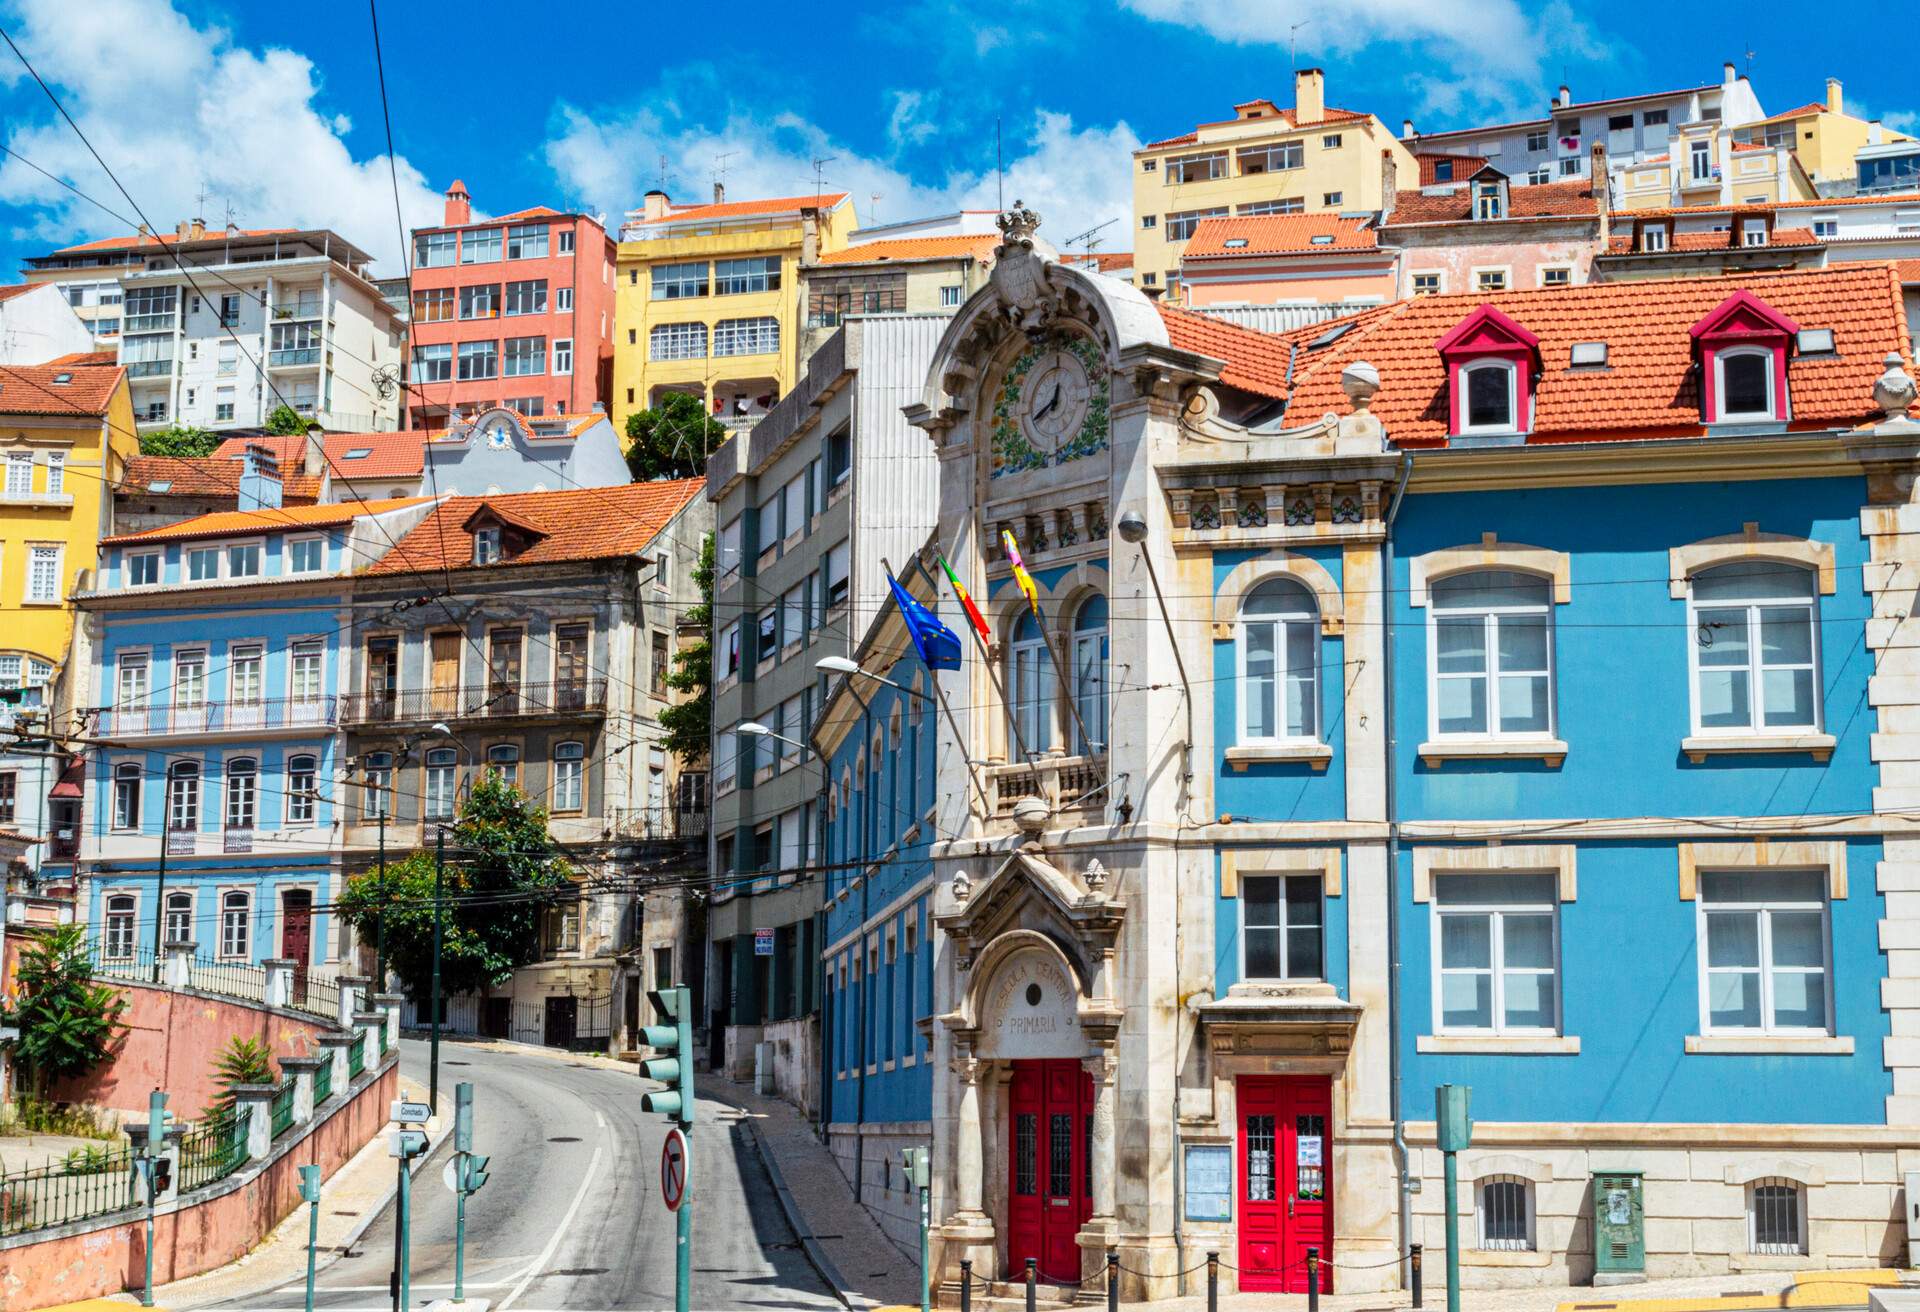 Historic architecture with colourful facades along a steep roadway.